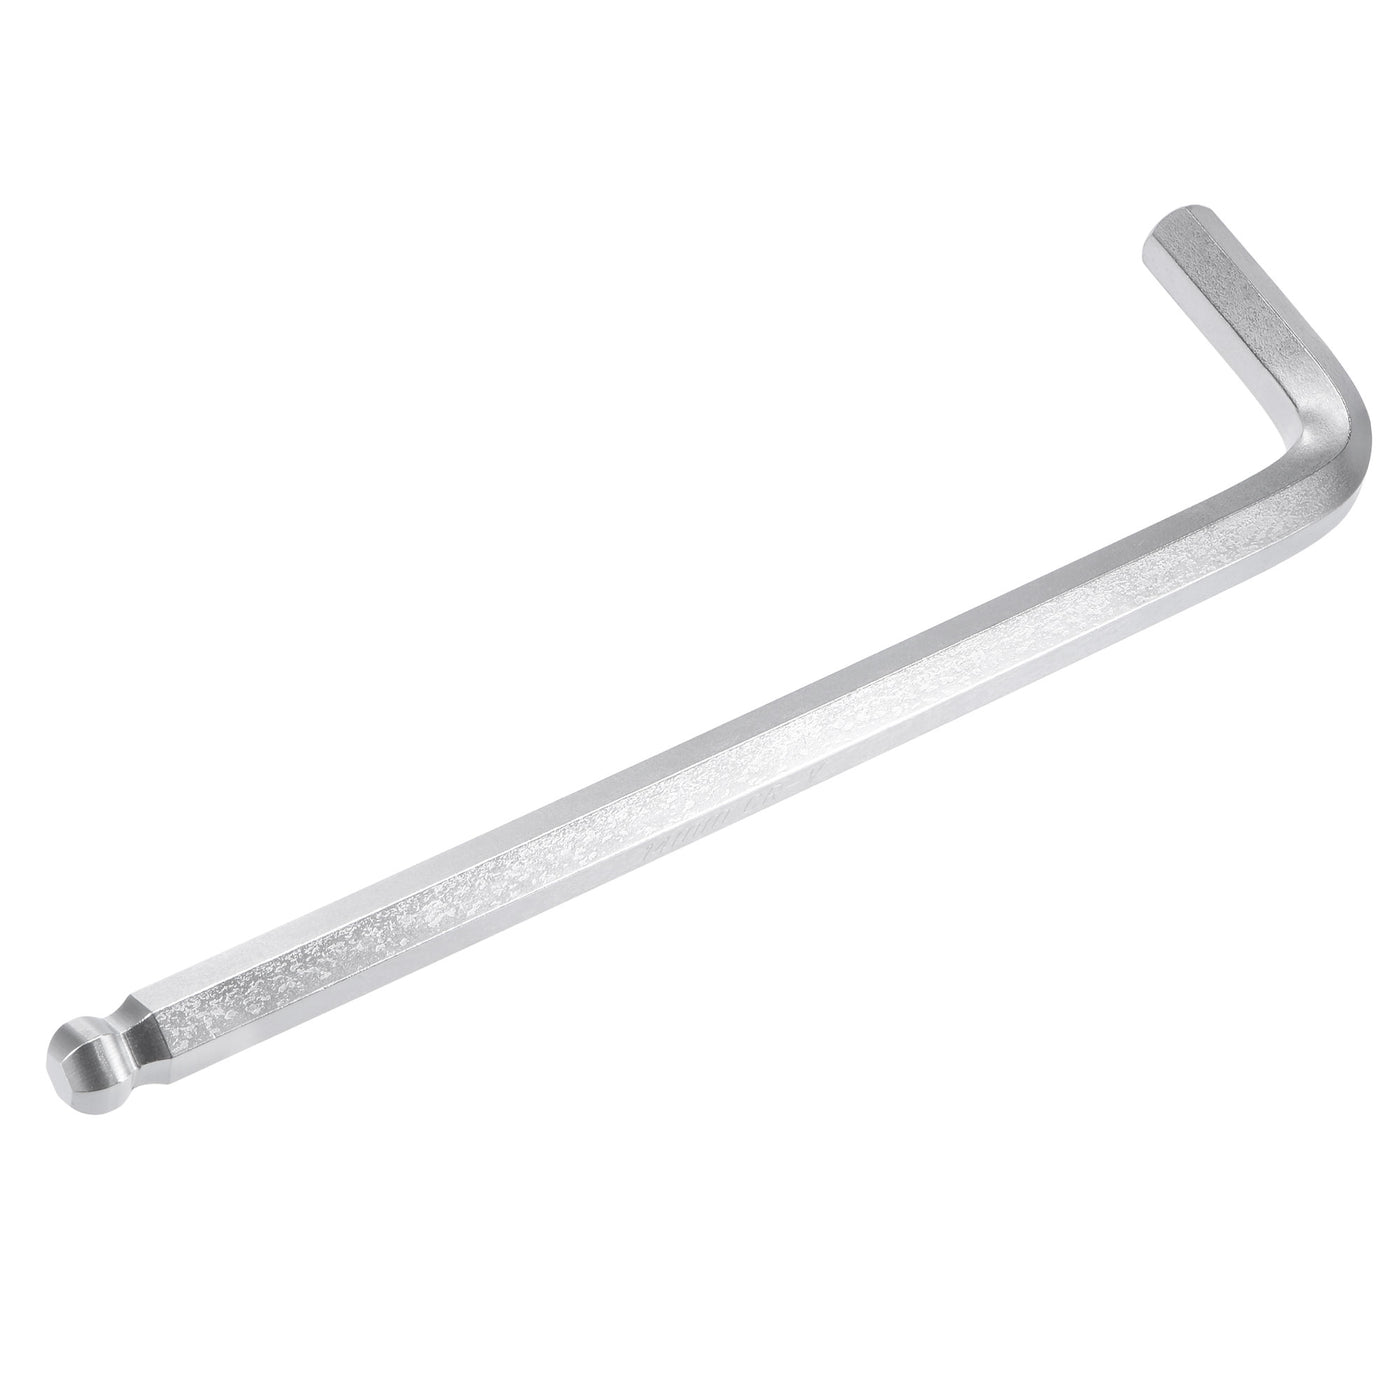 uxcell Uxcell Ball End Hex Key Wrench L Shaped Long Arm CR-V Repairing Tool